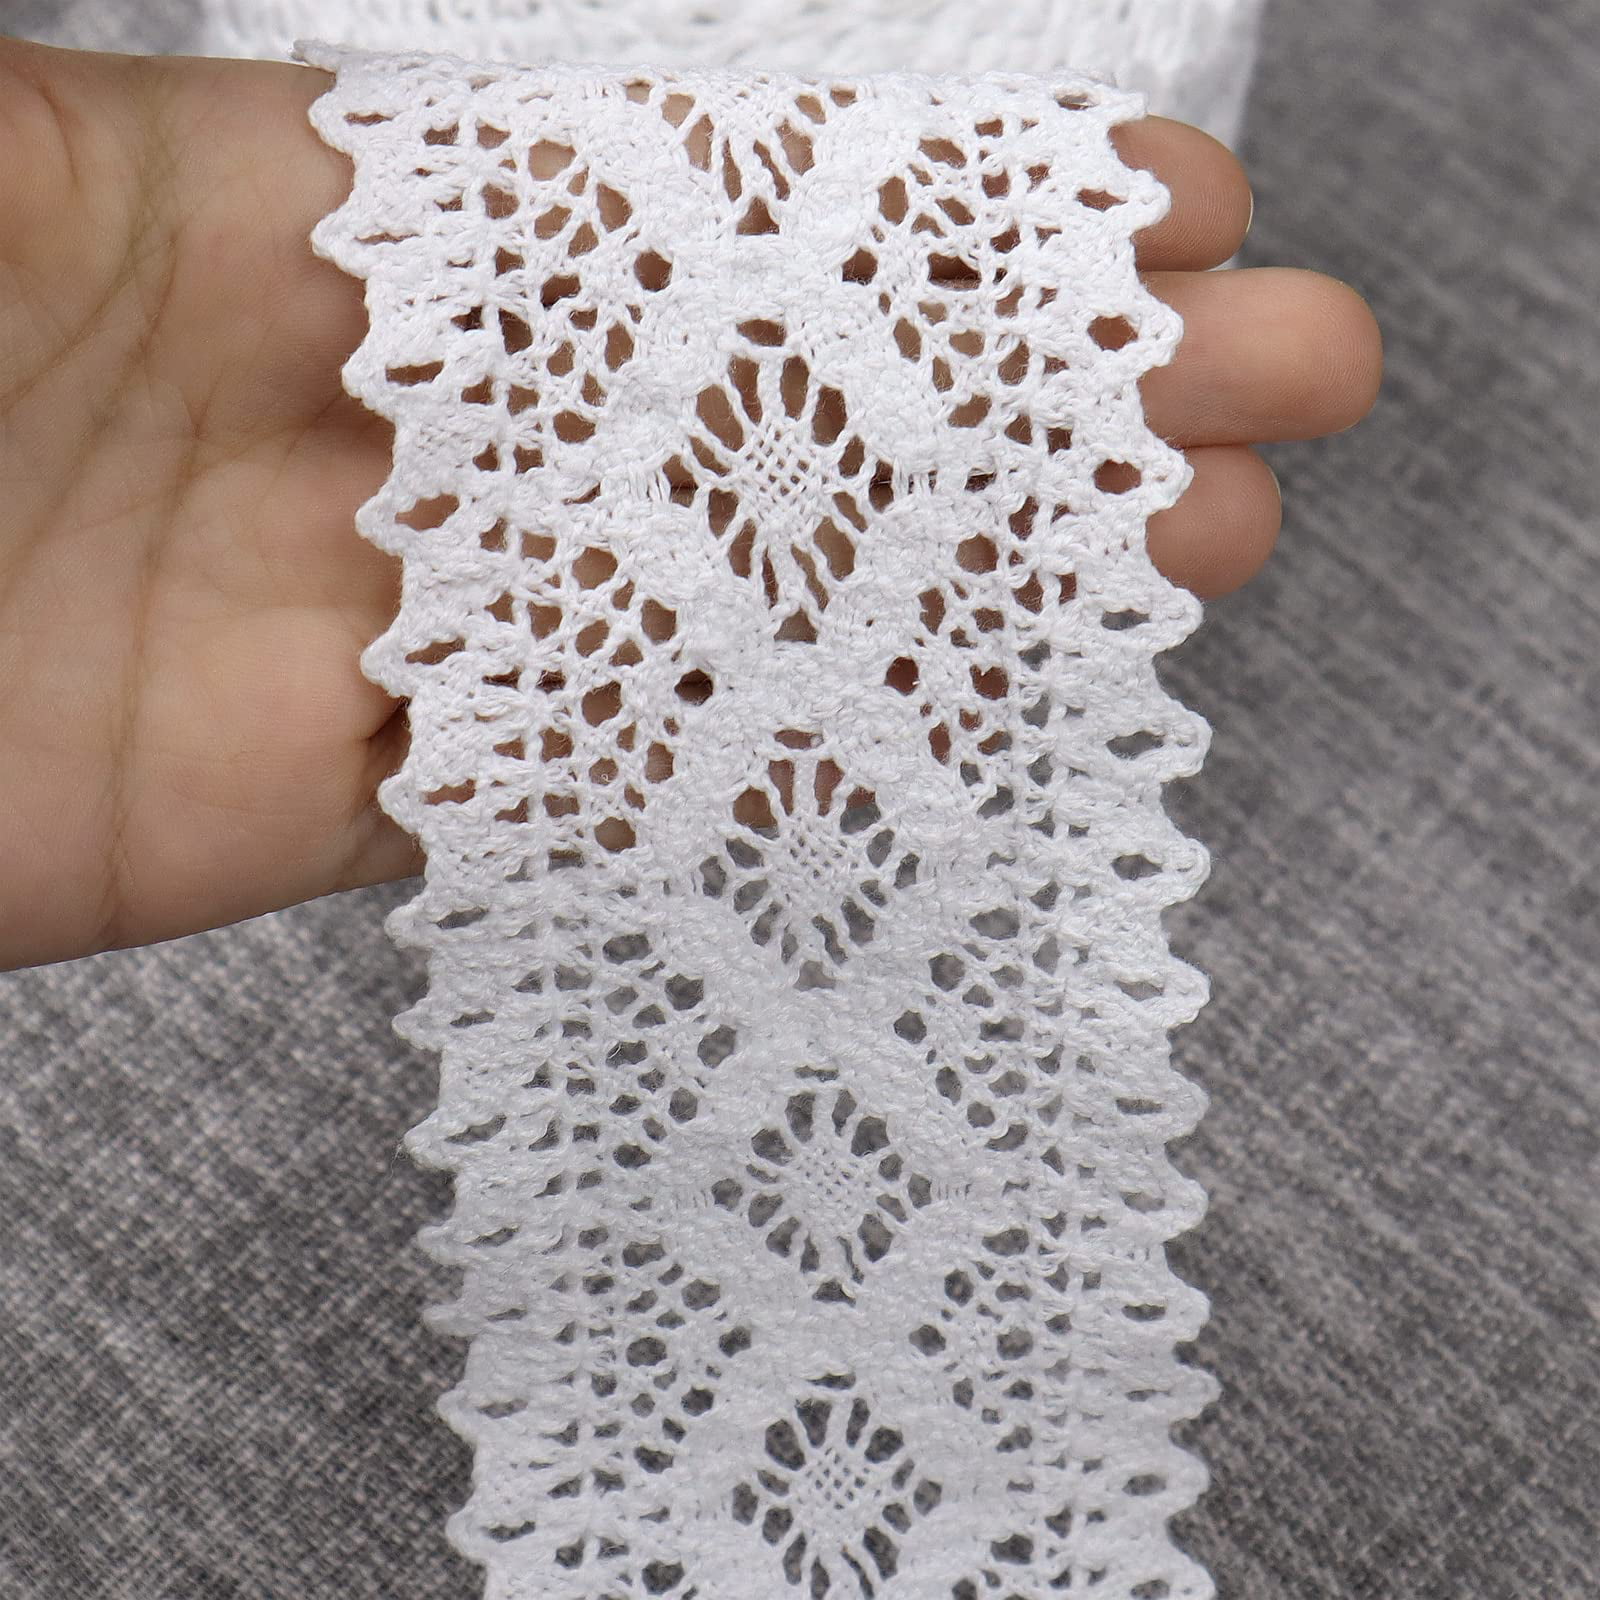 10 Yards of White Lace Trim/ 10 Yards of White Lace Ribbon, Approx. 1.7 4.4  Cm 